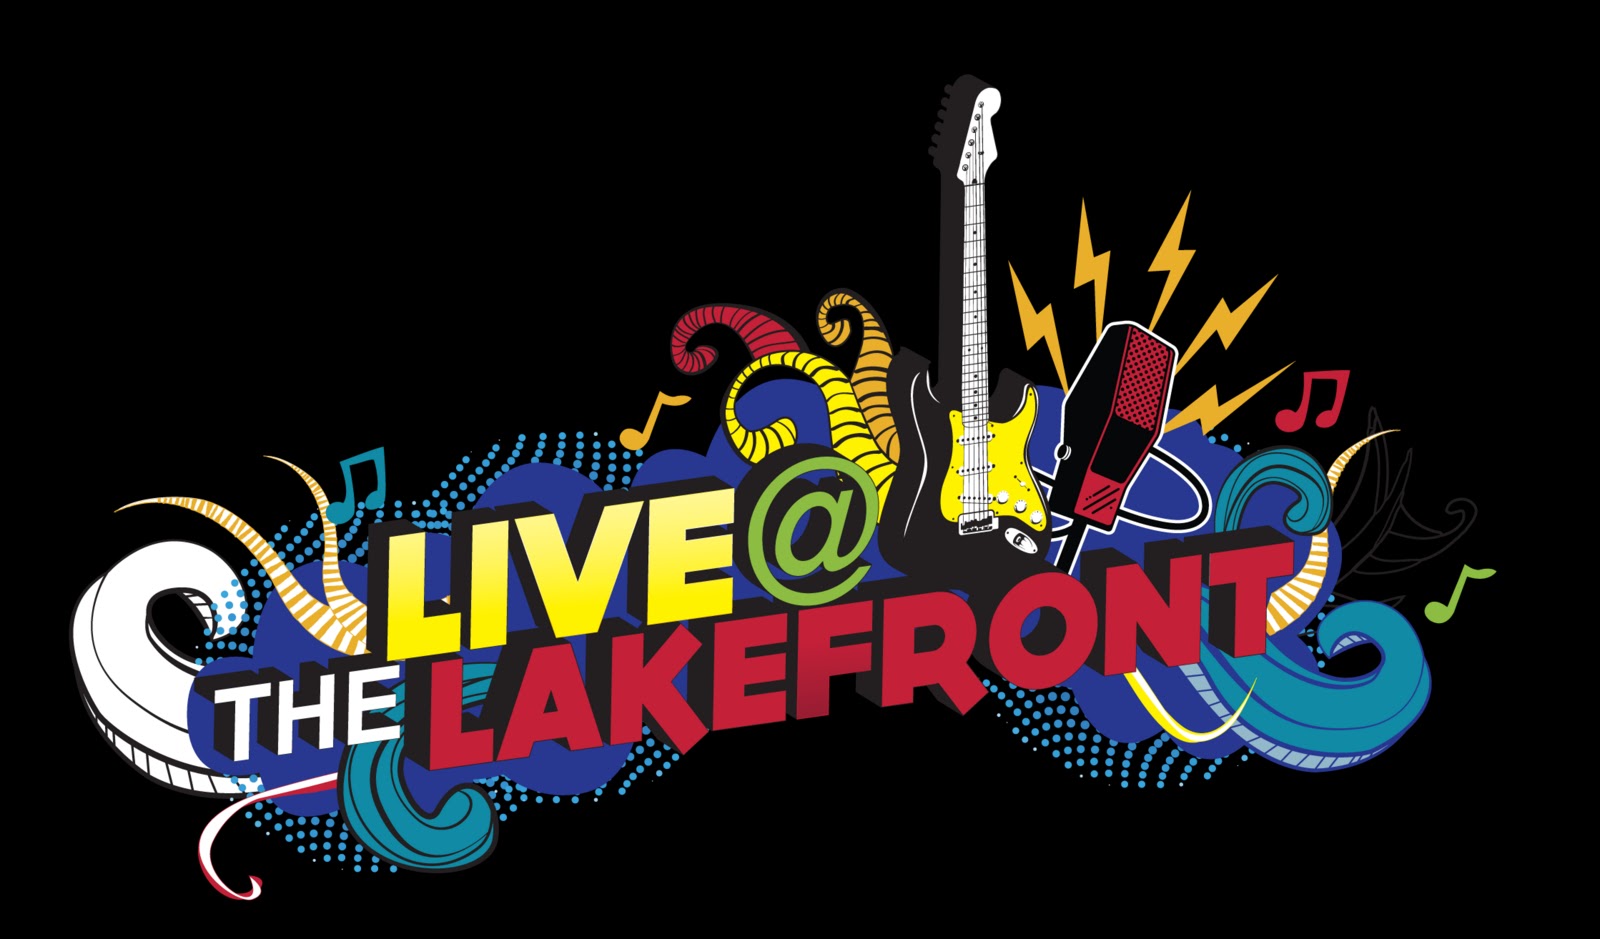 Live @ the Lakefront 2017